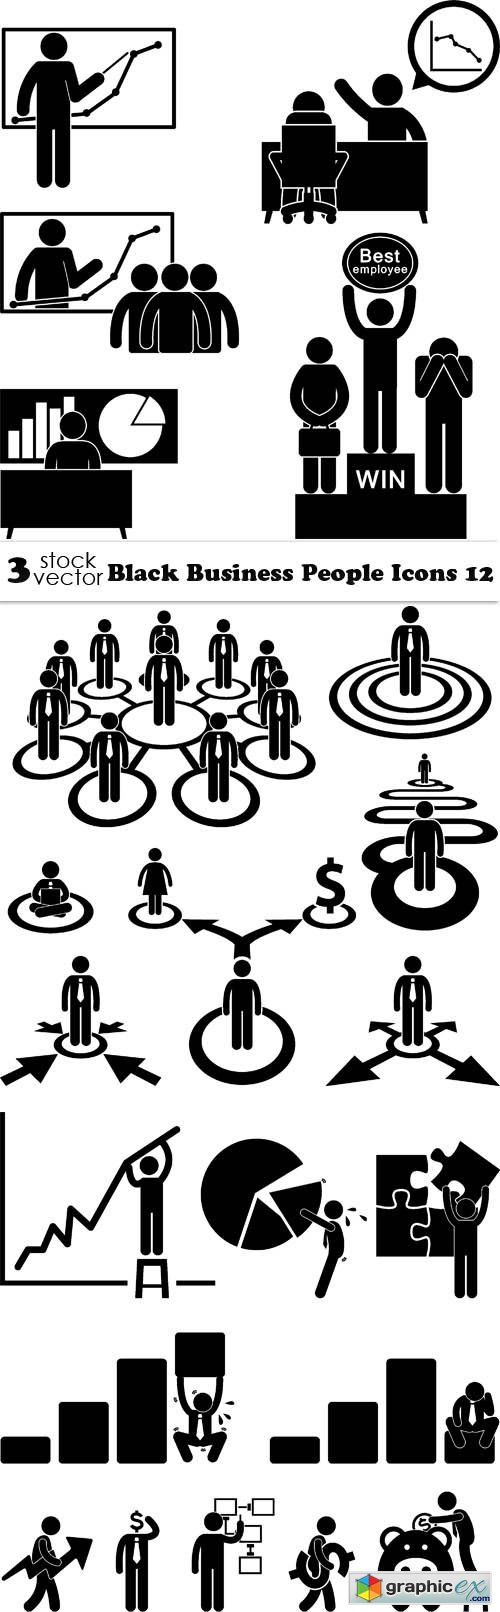 Black Business People Icons 12